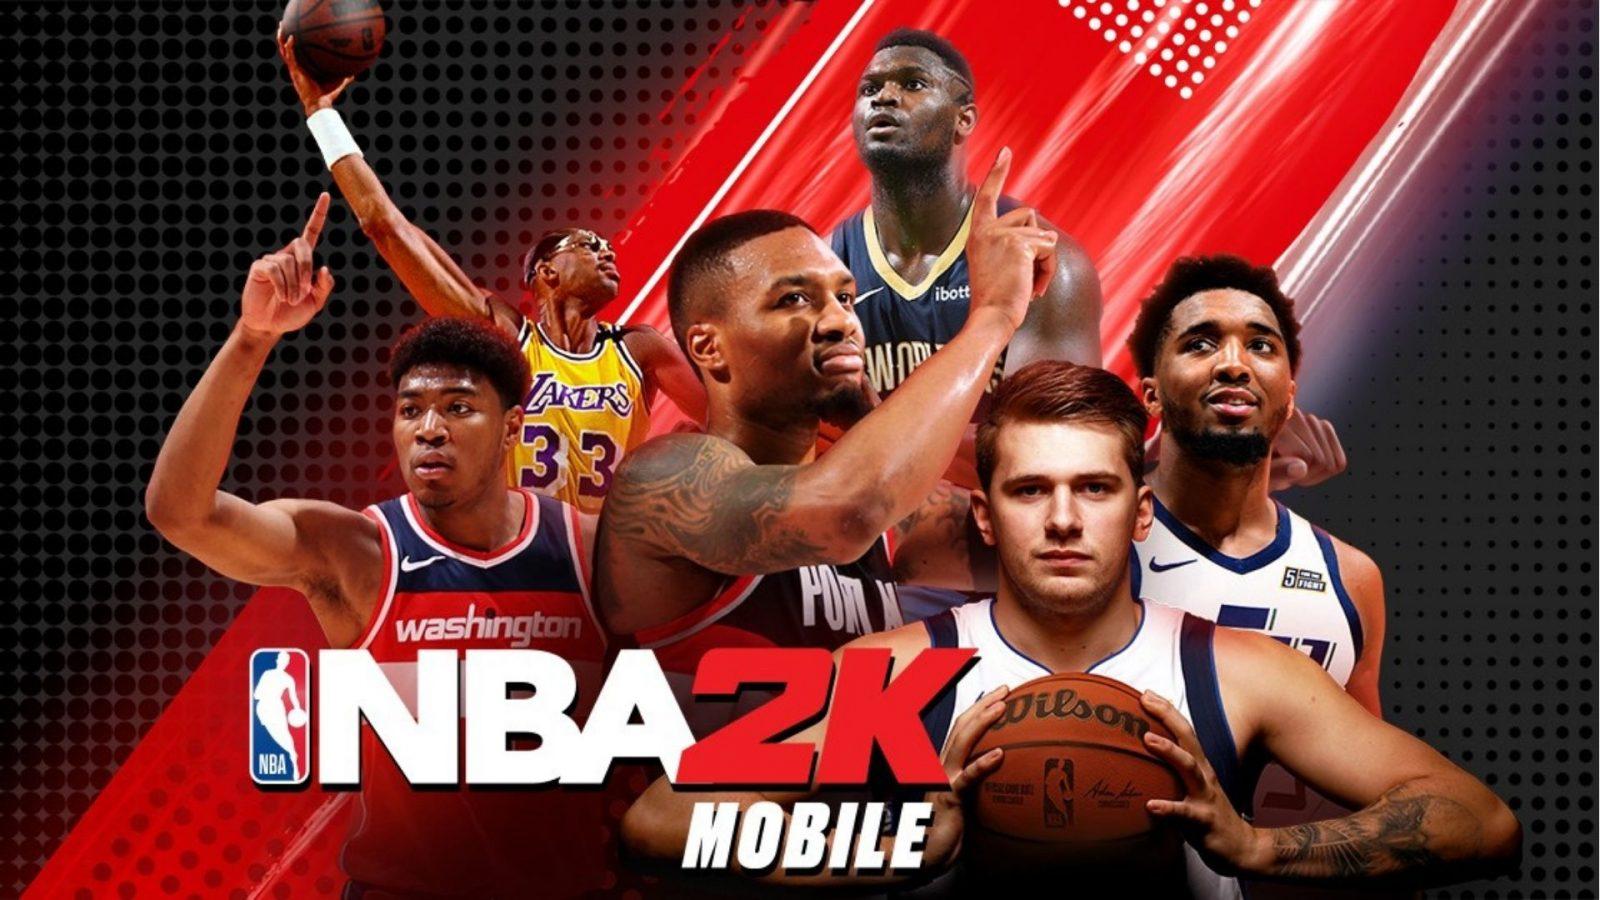 Dunking Simulator Codes (October 2023) - Free dollars and more